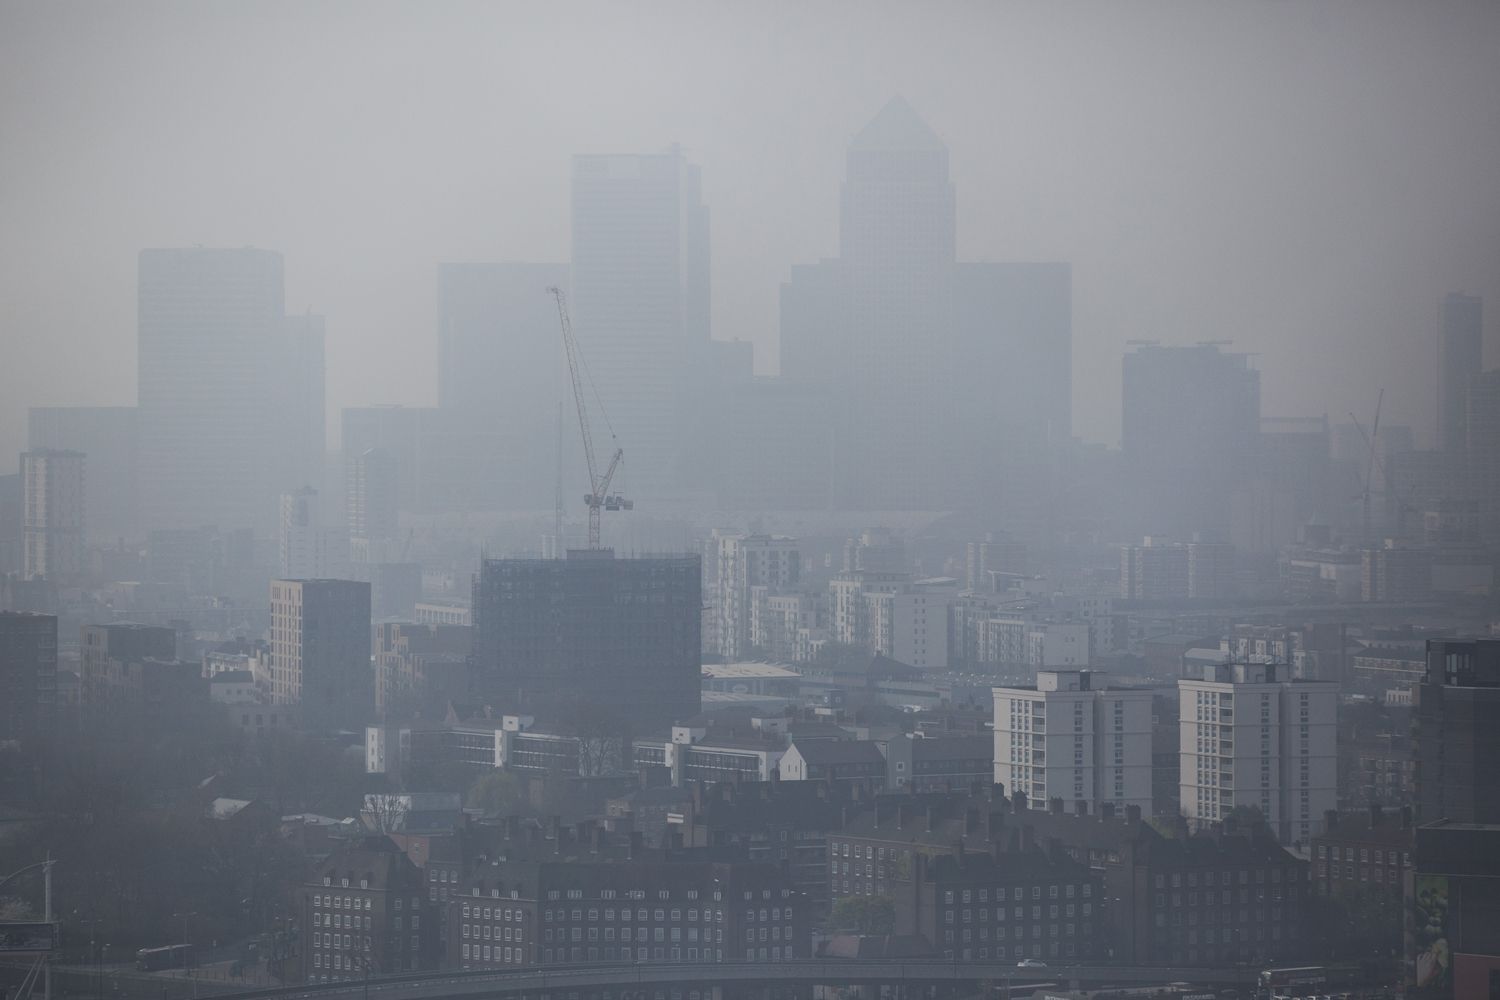 A general view through smog of the Canary Wharf financial district on April 2, 2014 in London. (Dan Kitwood—Getty Images)